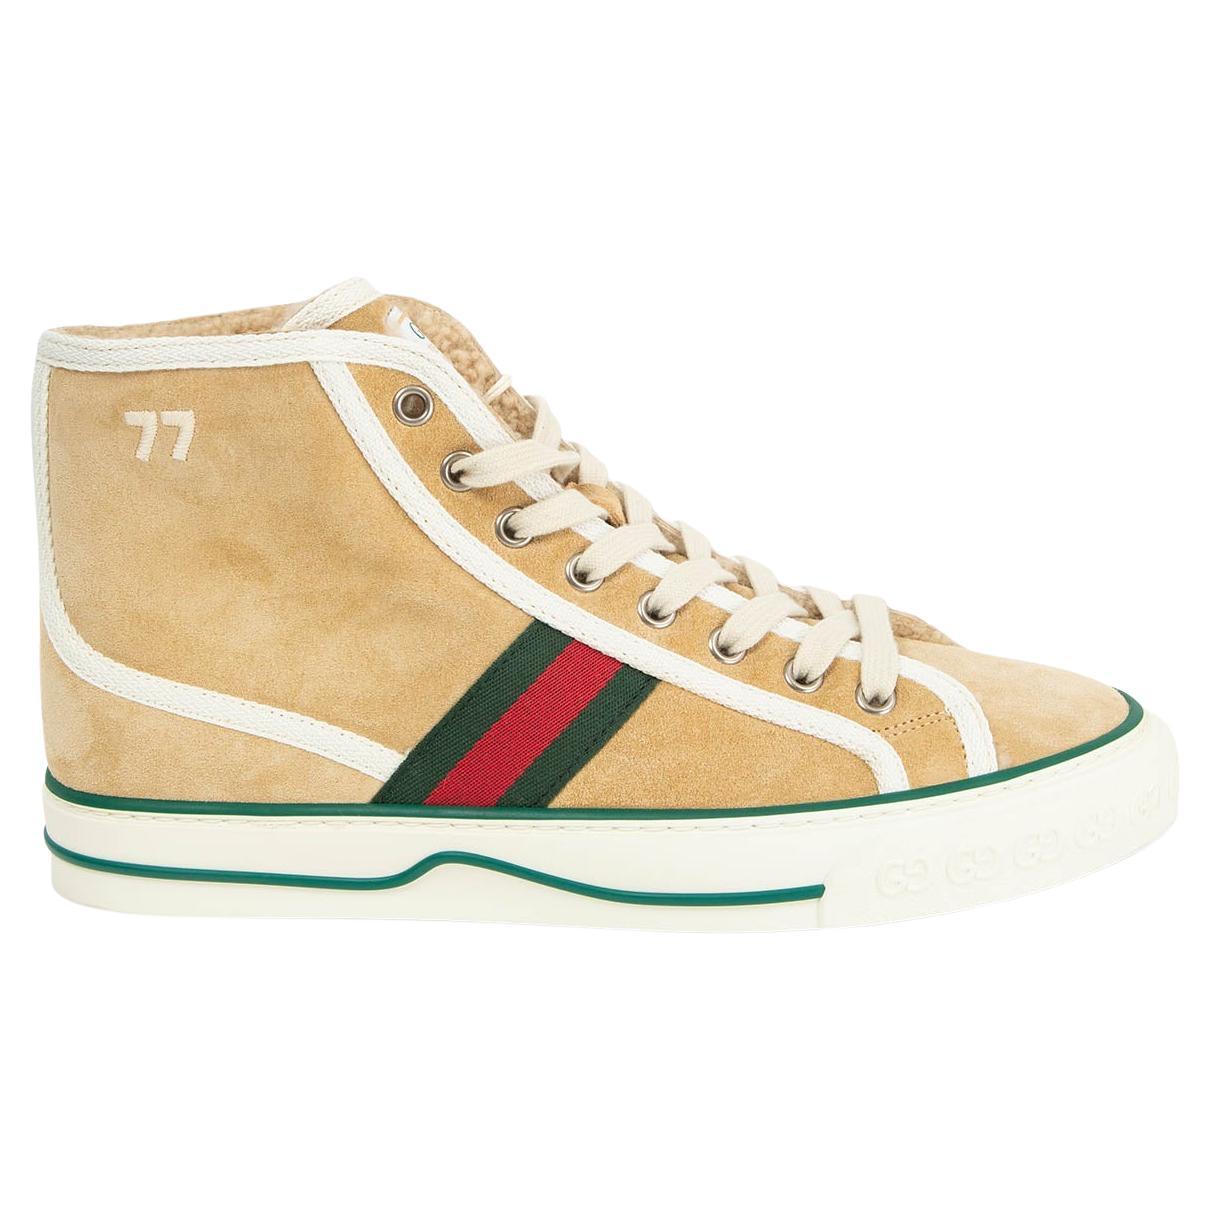 GUCCI beige suede TENNIS 1977 SHEARLING LINED High Top Sneakers Shoes 38 For Sale